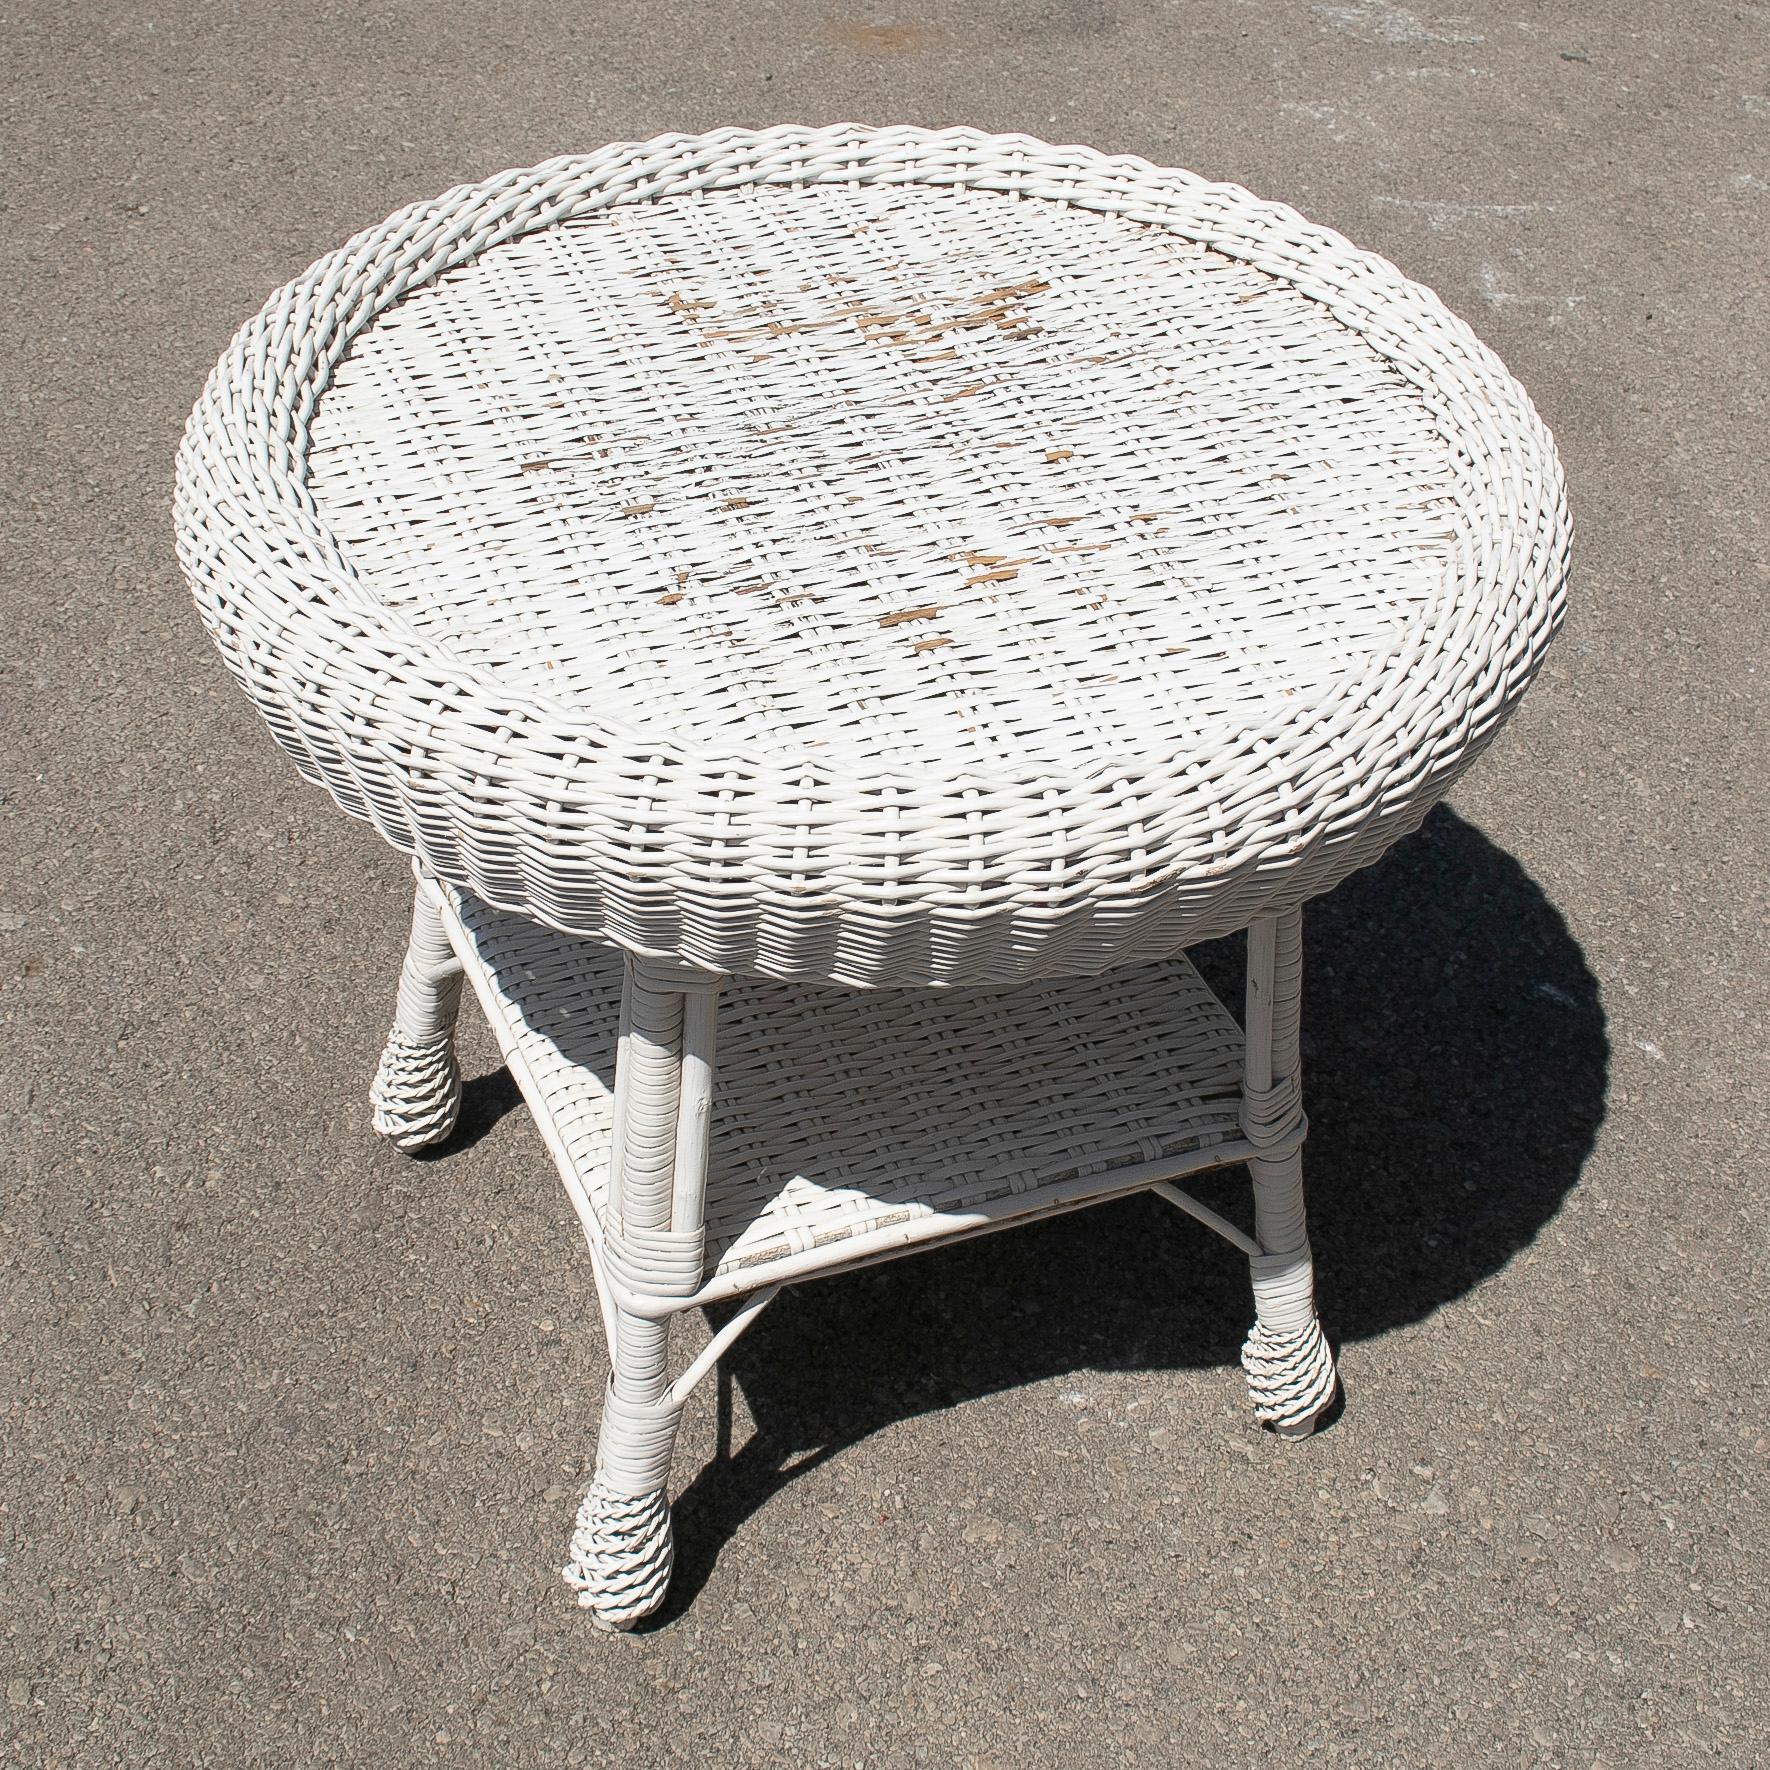 Vintage 1970s Spanish hand woven wicker round side table.